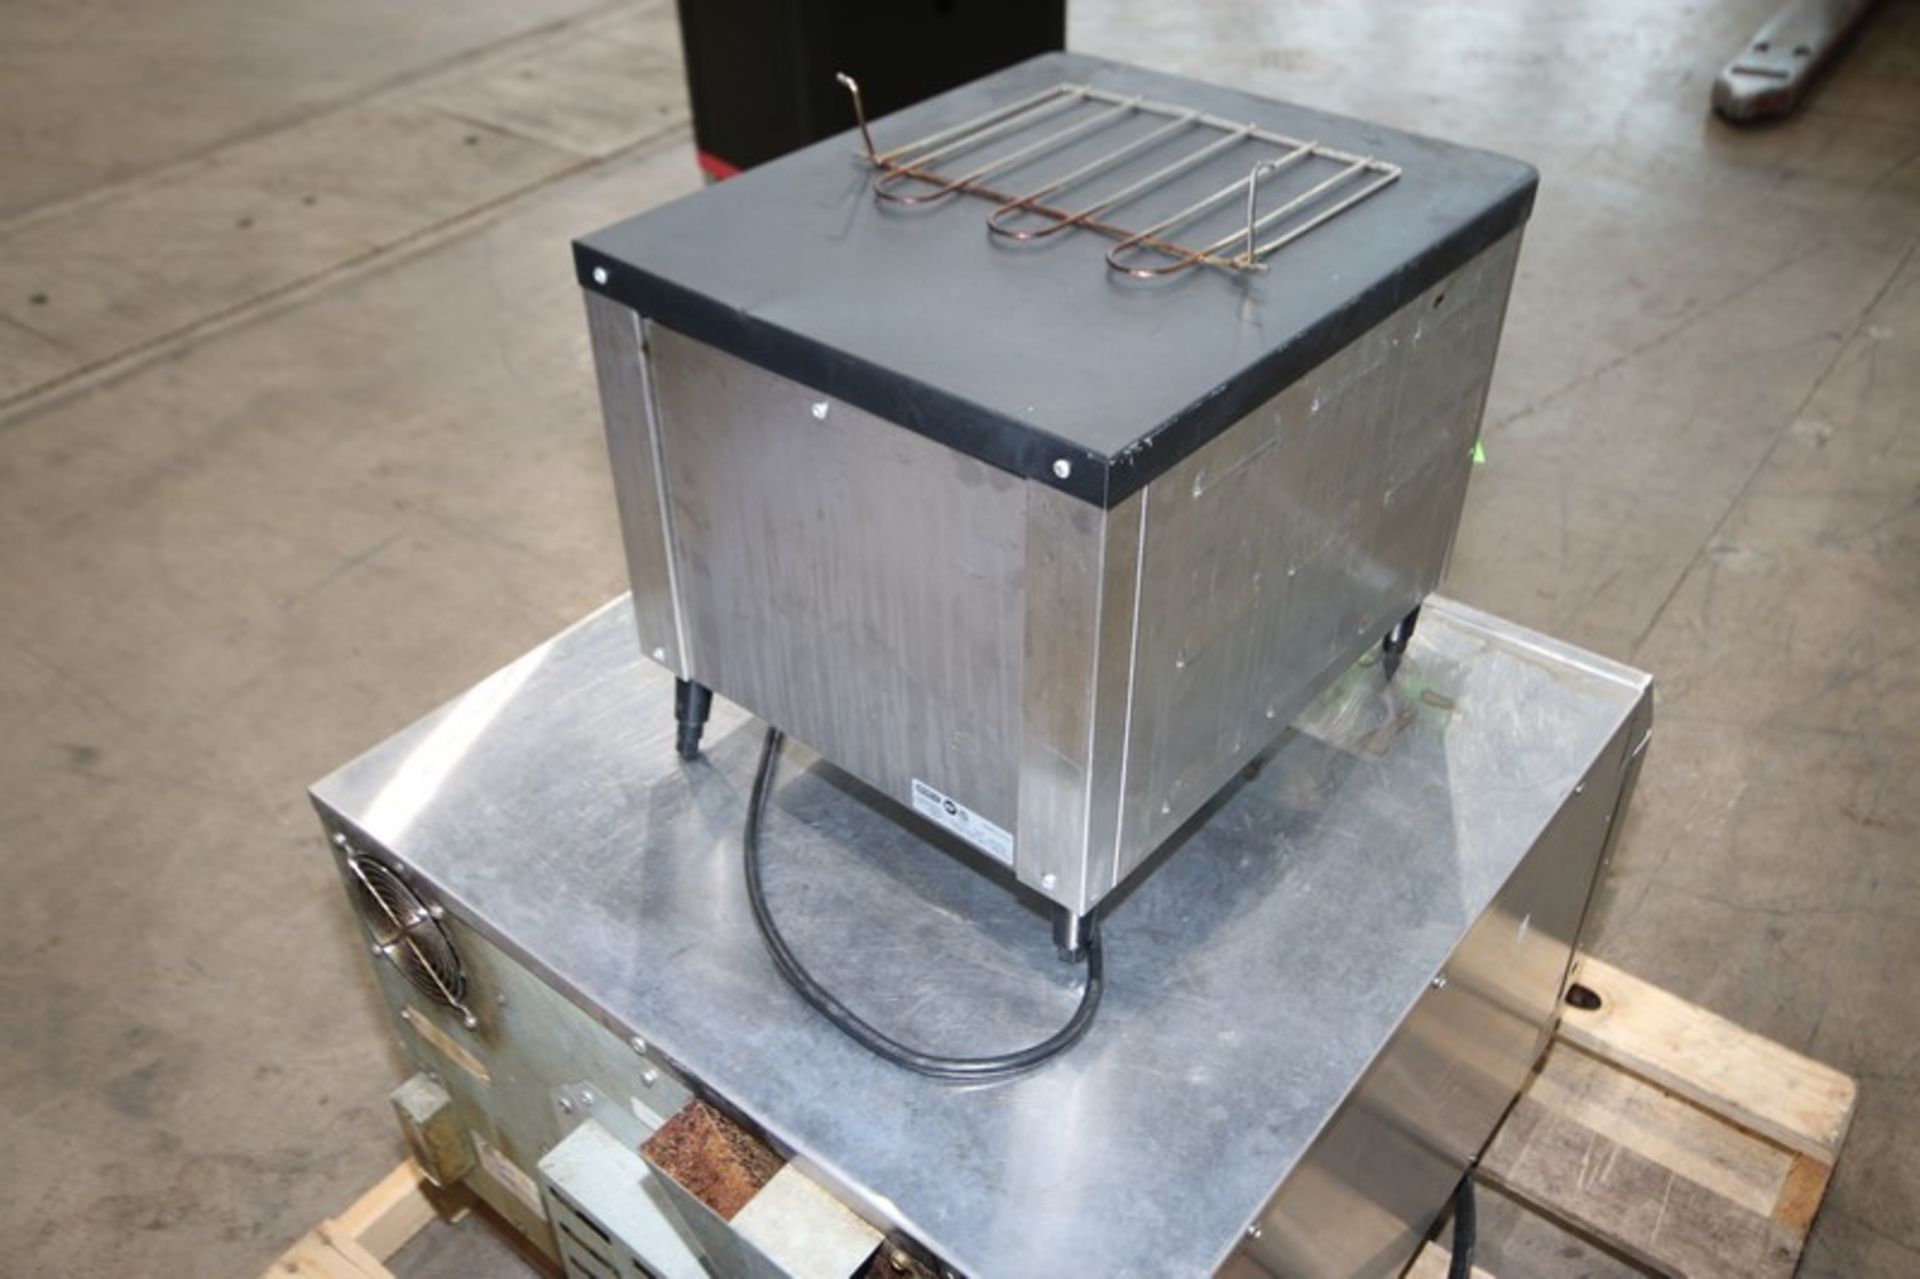 Nemco Flo-Thru Toaster,M/N 6800, S/N K18-0003, with Power Cord (INV#83111)(Located @ the MDG Auction - Image 2 of 3